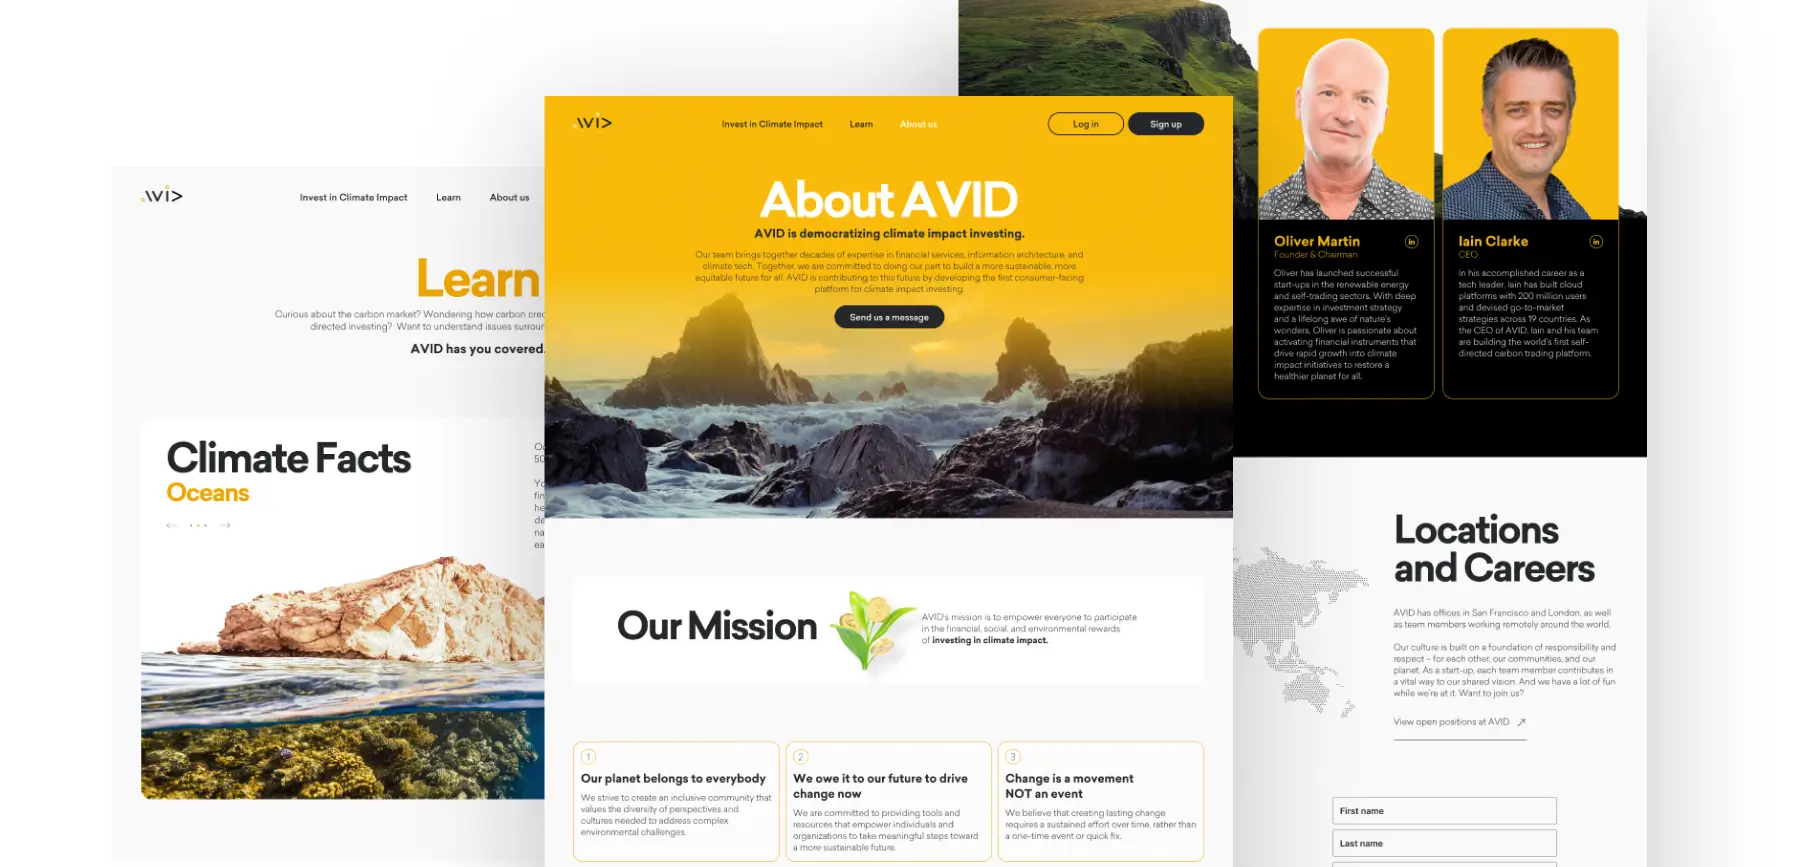 Orange Bird helped AVID design and implement a new website to promote their climate impact investing app to their target audience